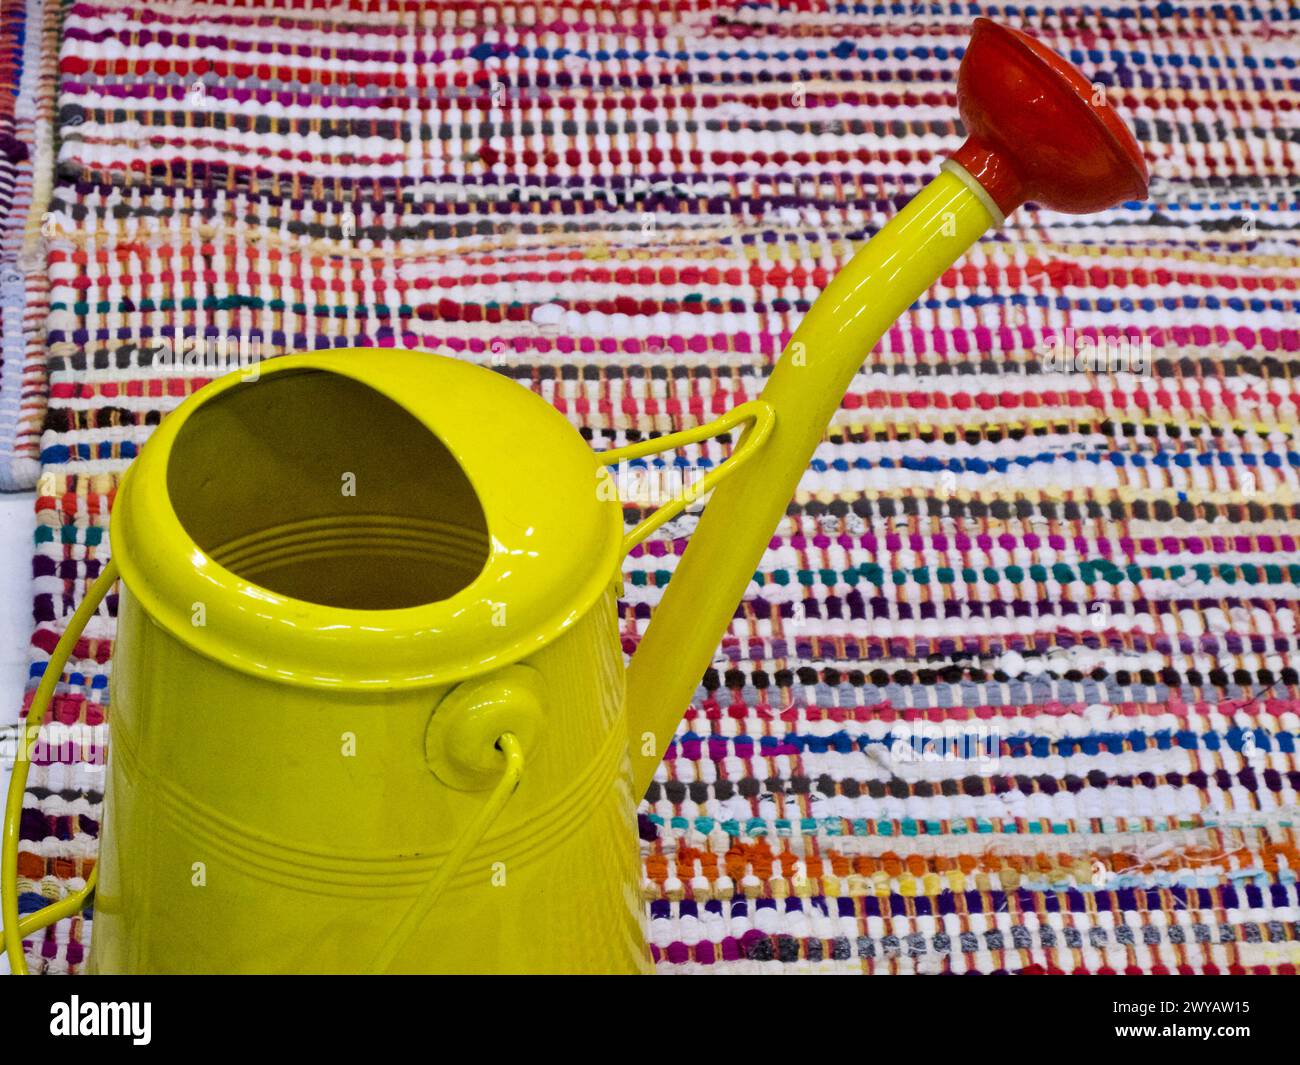 Metal outdoor watering can on a striped colourful carpet on the balcony in spring. Stock Photo